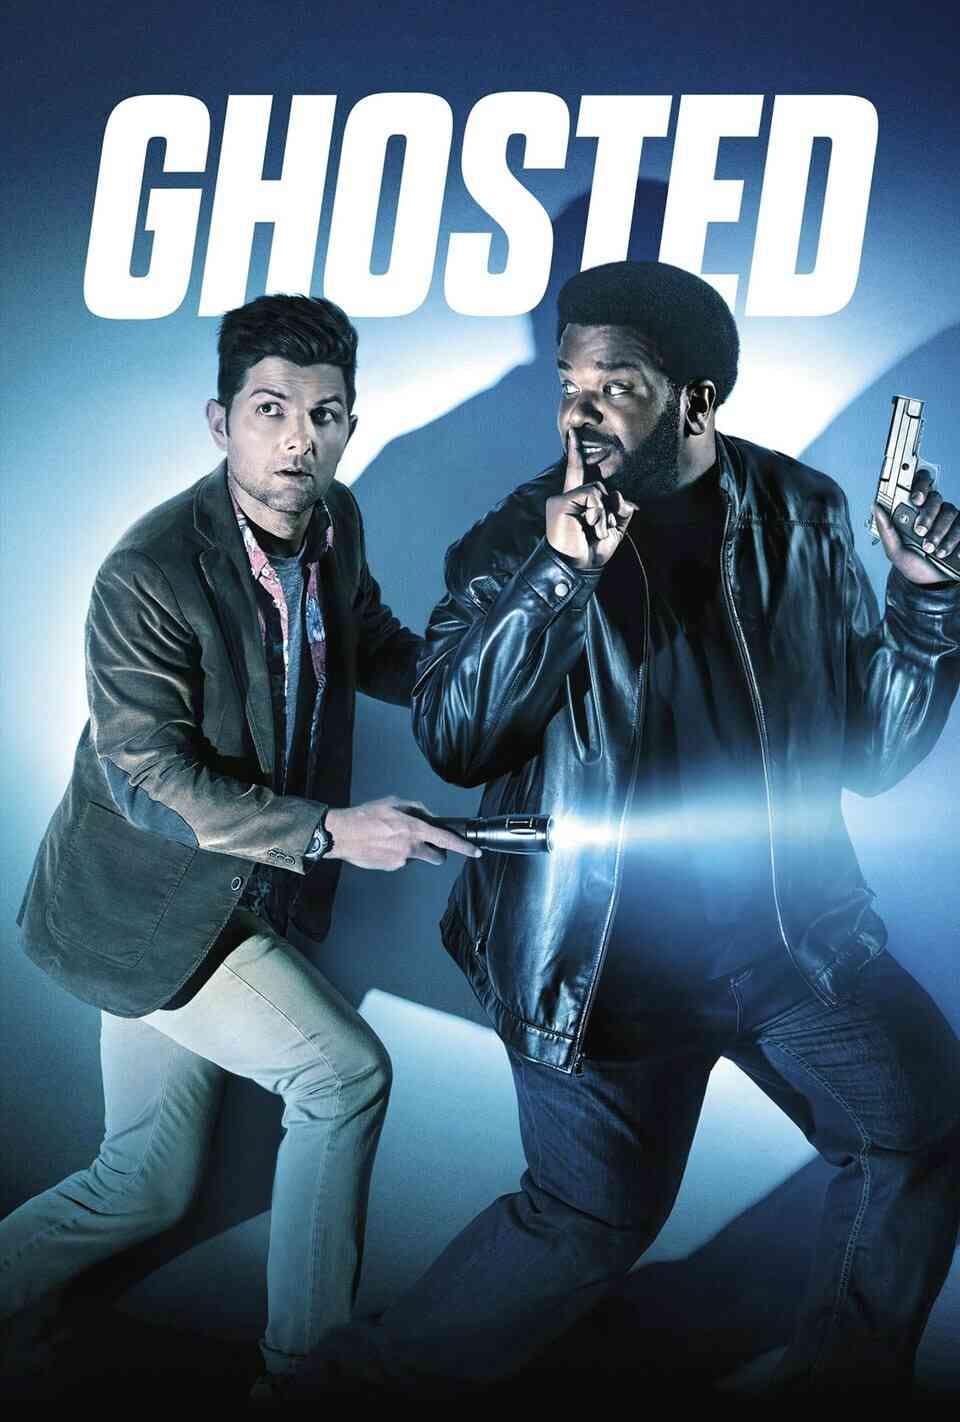 Read Ghosted screenplay.